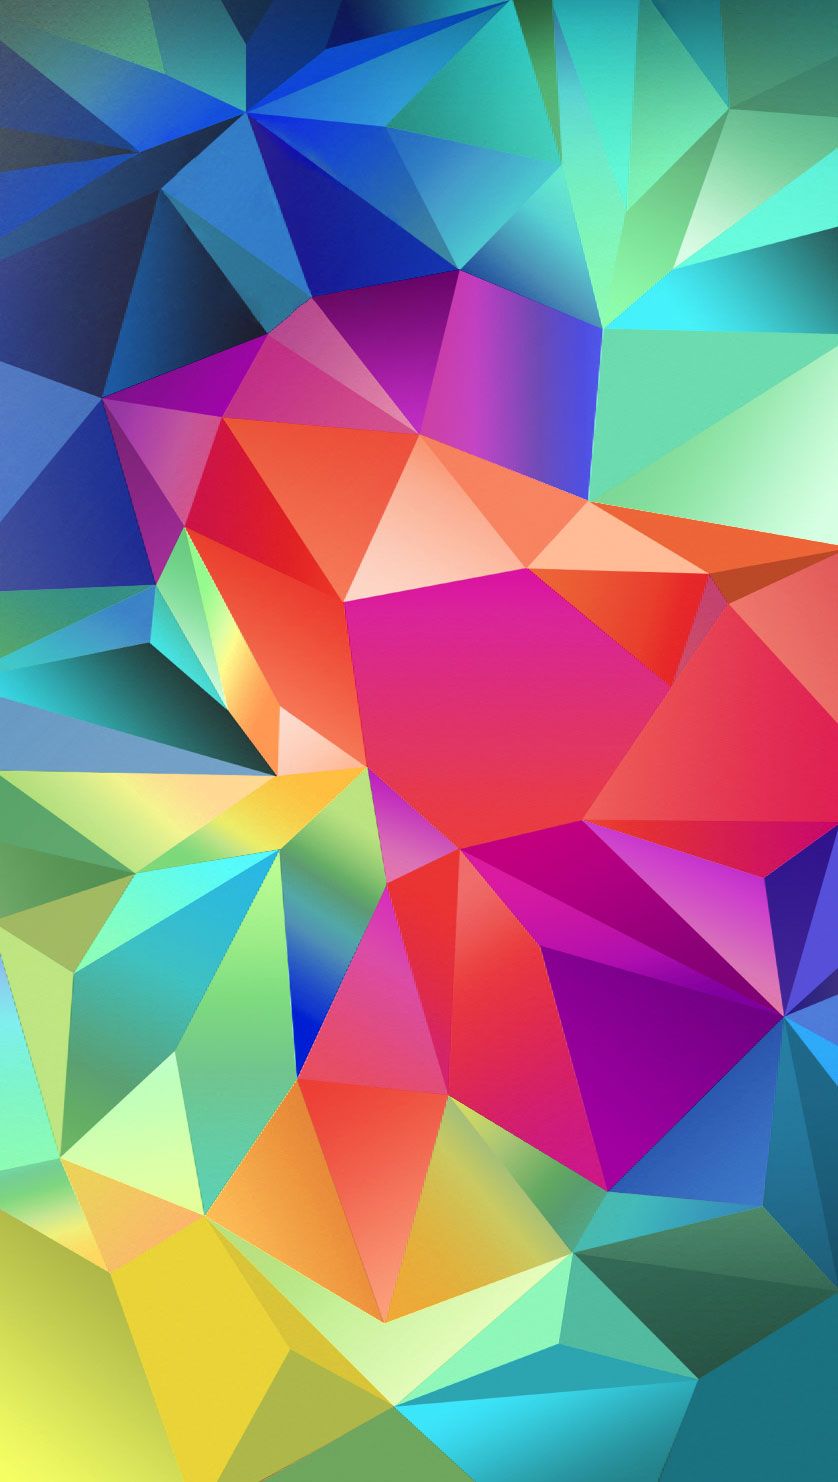 Best Galaxy S5 Wallpapers on WallpaperDog